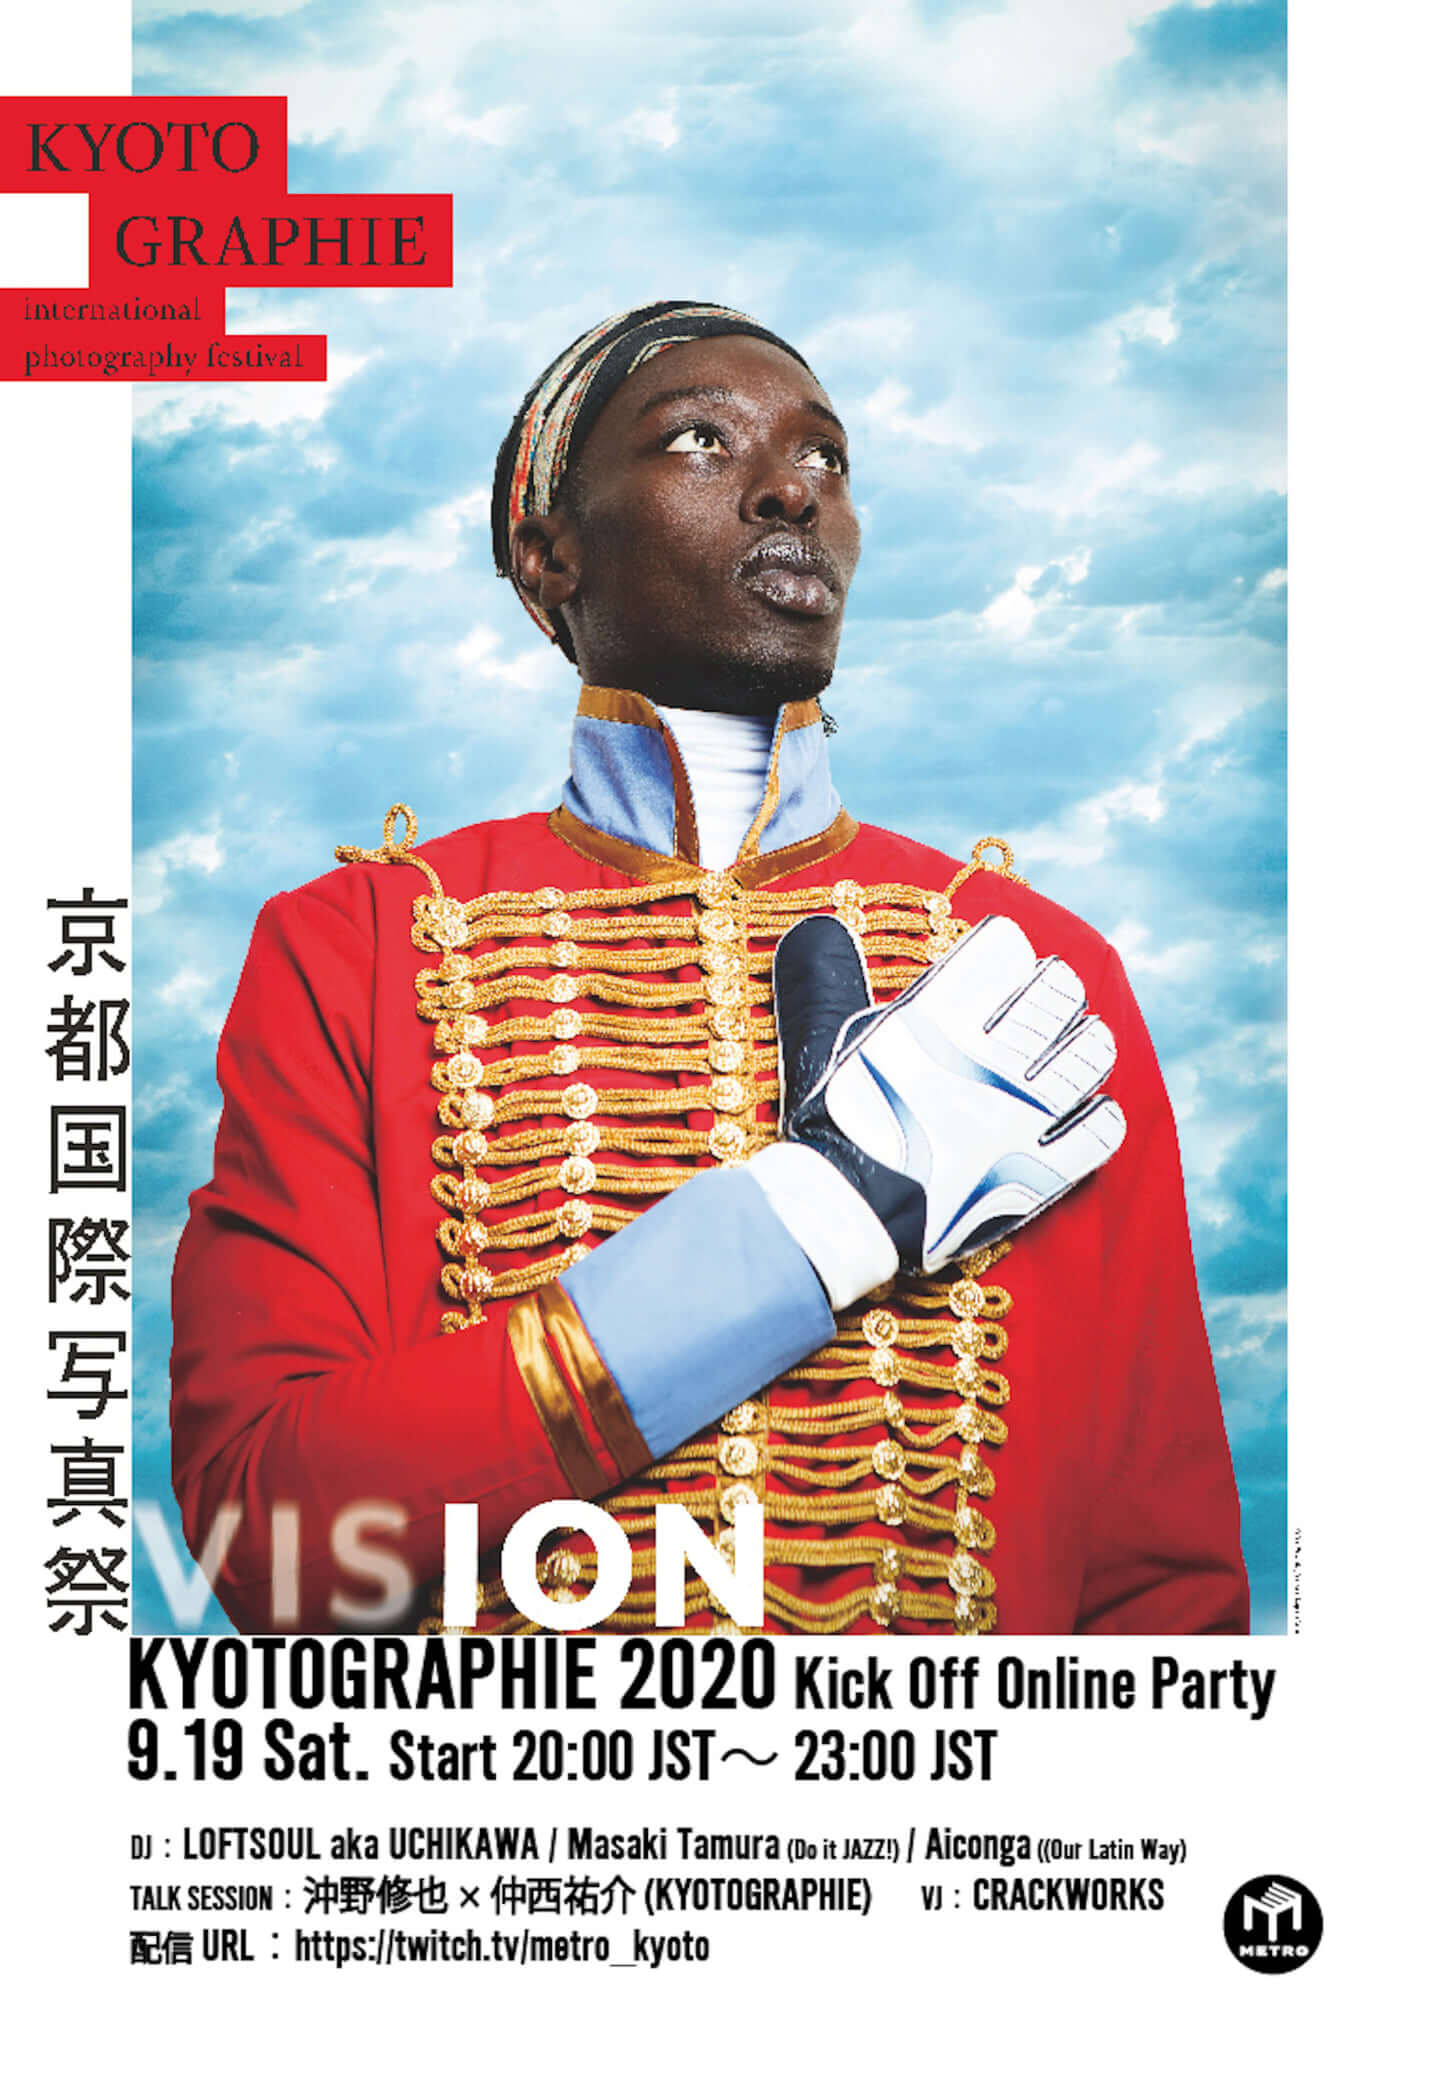 KYOTOGRAPHIE 2020 Kick Off Online Party